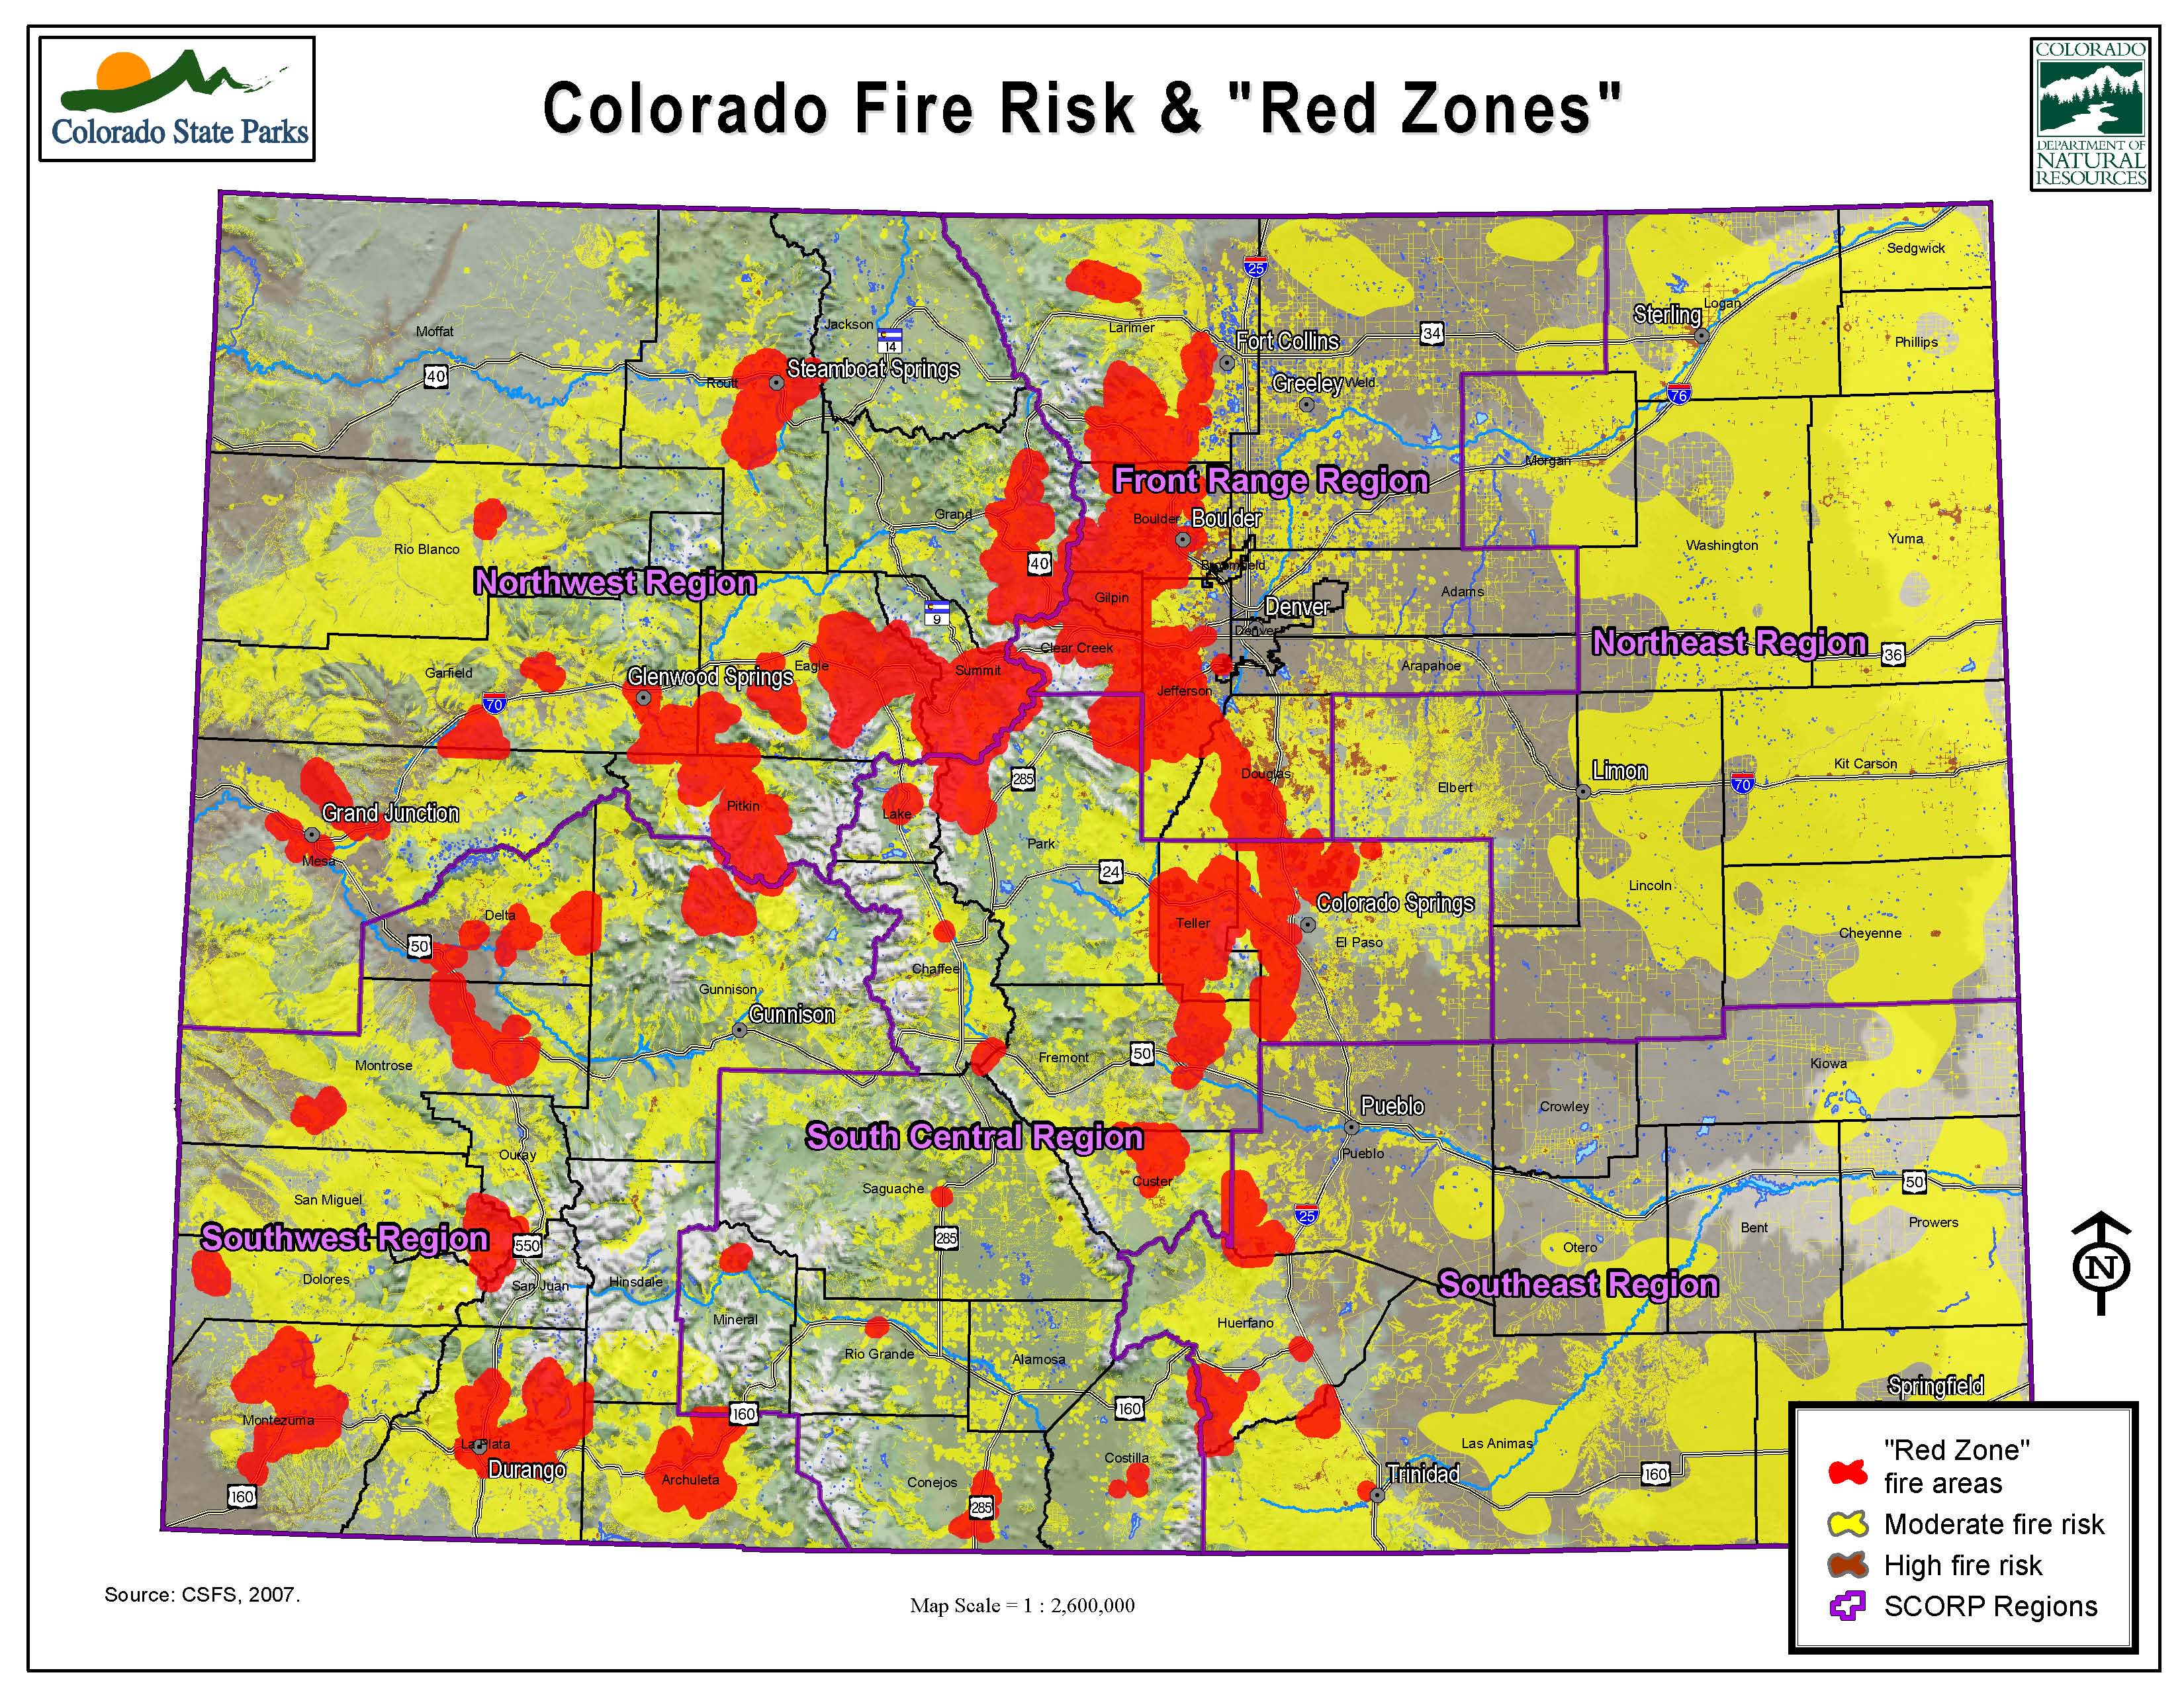 Over 1 Million Colorado Residents Live In High Fire Risk Locations